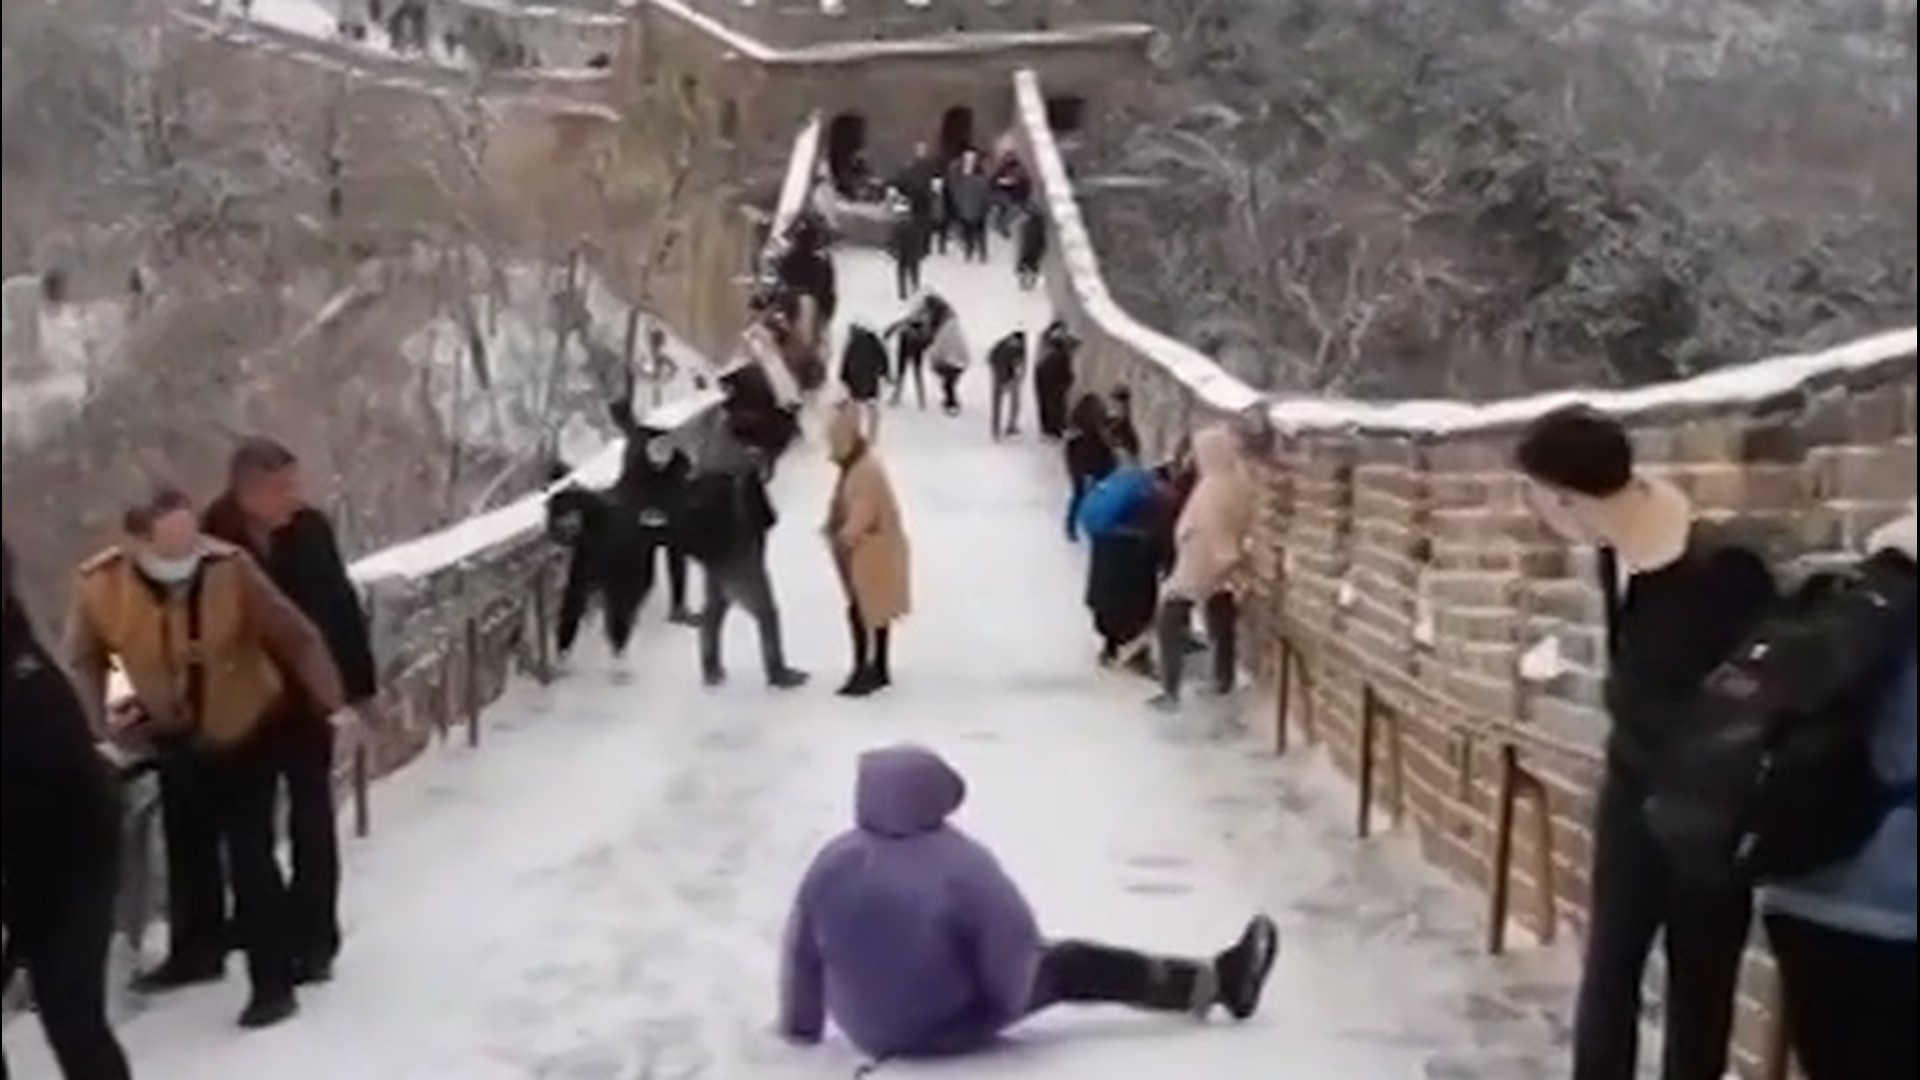 Tourists struggled to walk along the Great Wall of China on Nov. 21, after a winter storm coated the historic attraction in snow and ice.